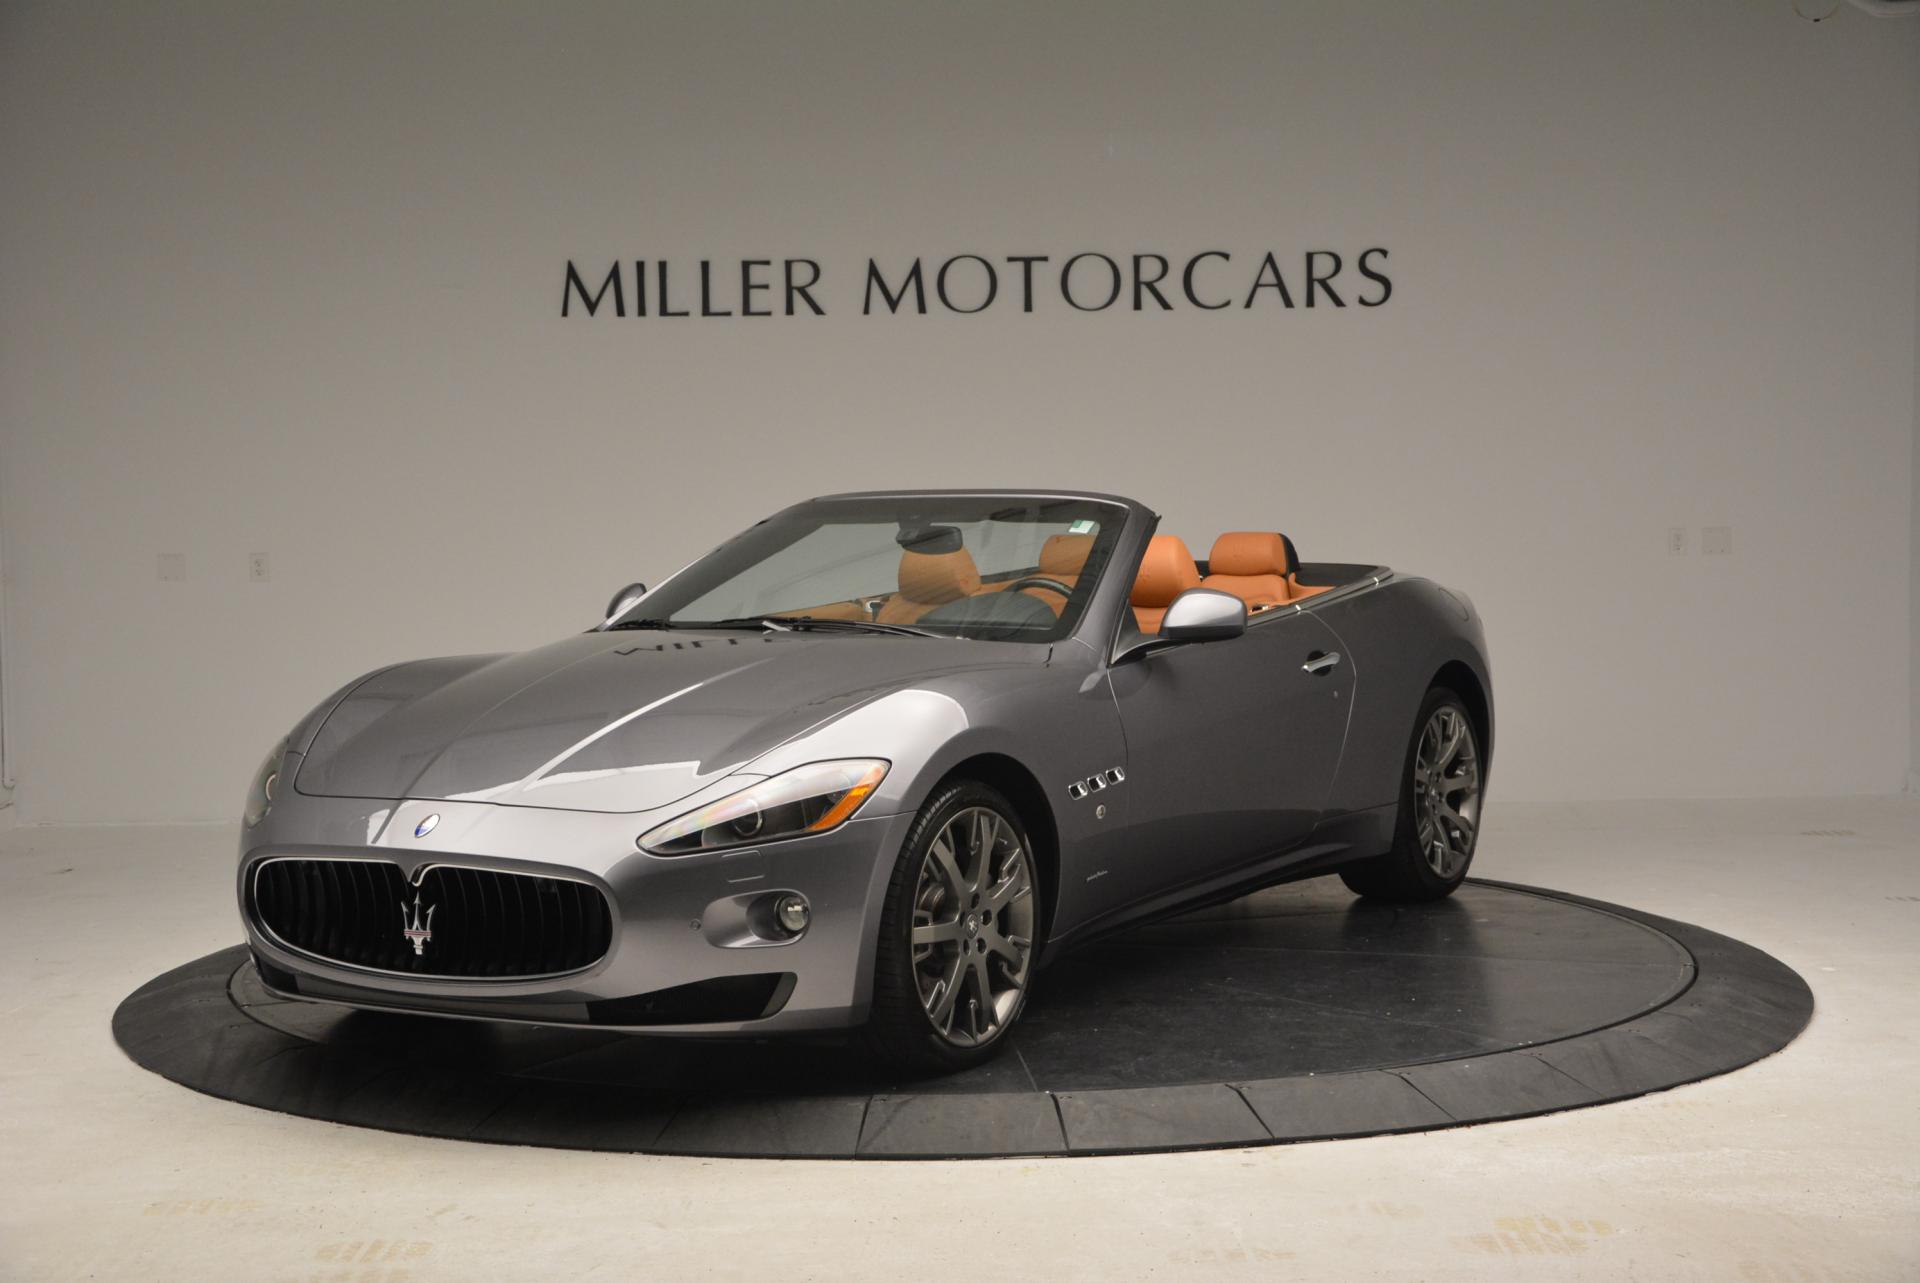 Used 2012 Maserati GranTurismo for sale Sold at Rolls-Royce Motor Cars Greenwich in Greenwich CT 06830 1